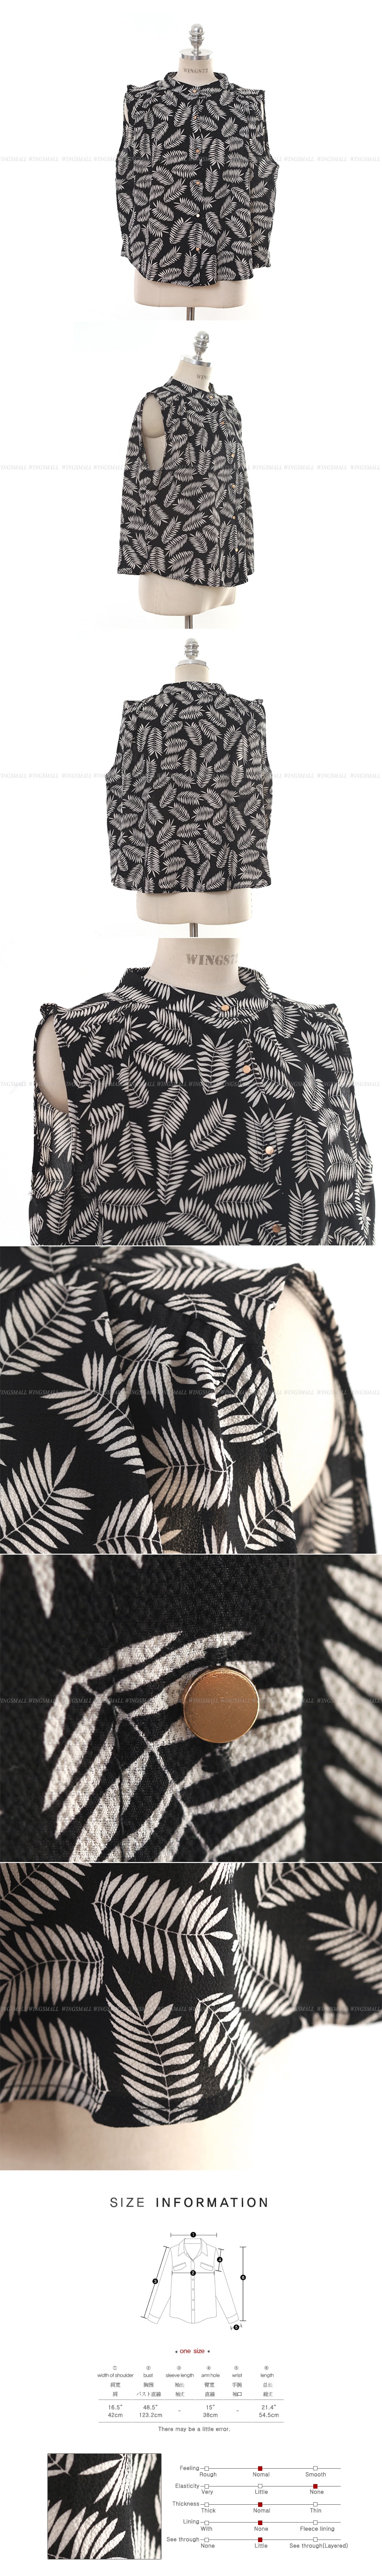 [Special Offer] Leaf Print Blouse and Culottes Shorts 2 Pieces Set One Size(M/27-29)